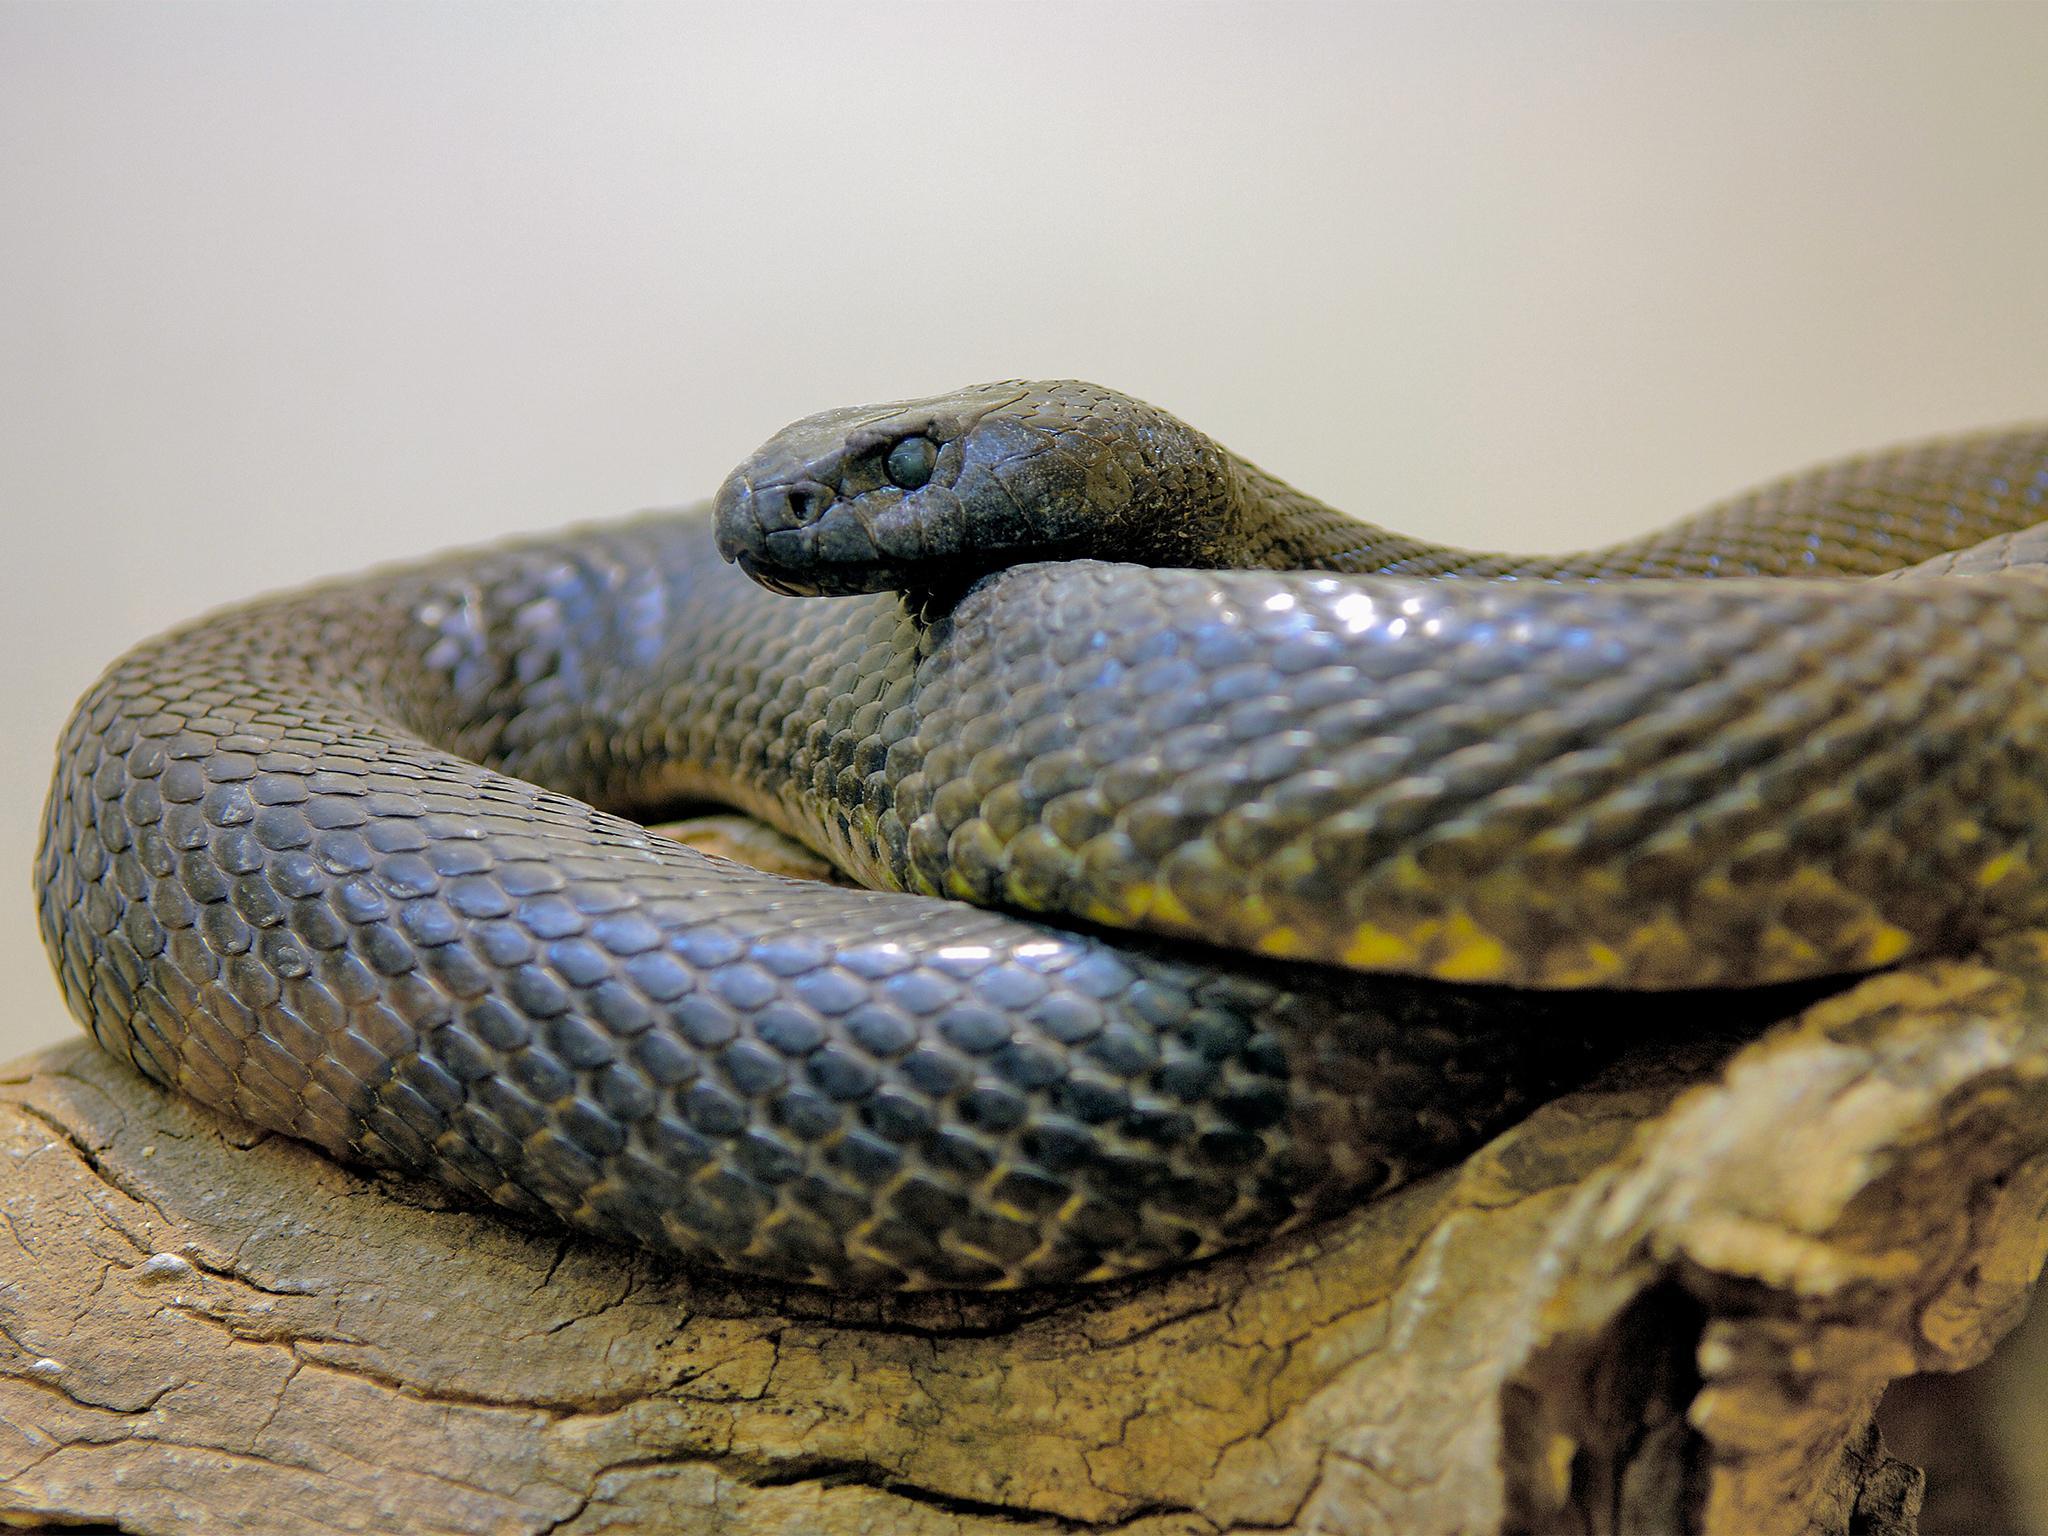 Weird Animal Question of the Week: What's the Most Toxic Snake?